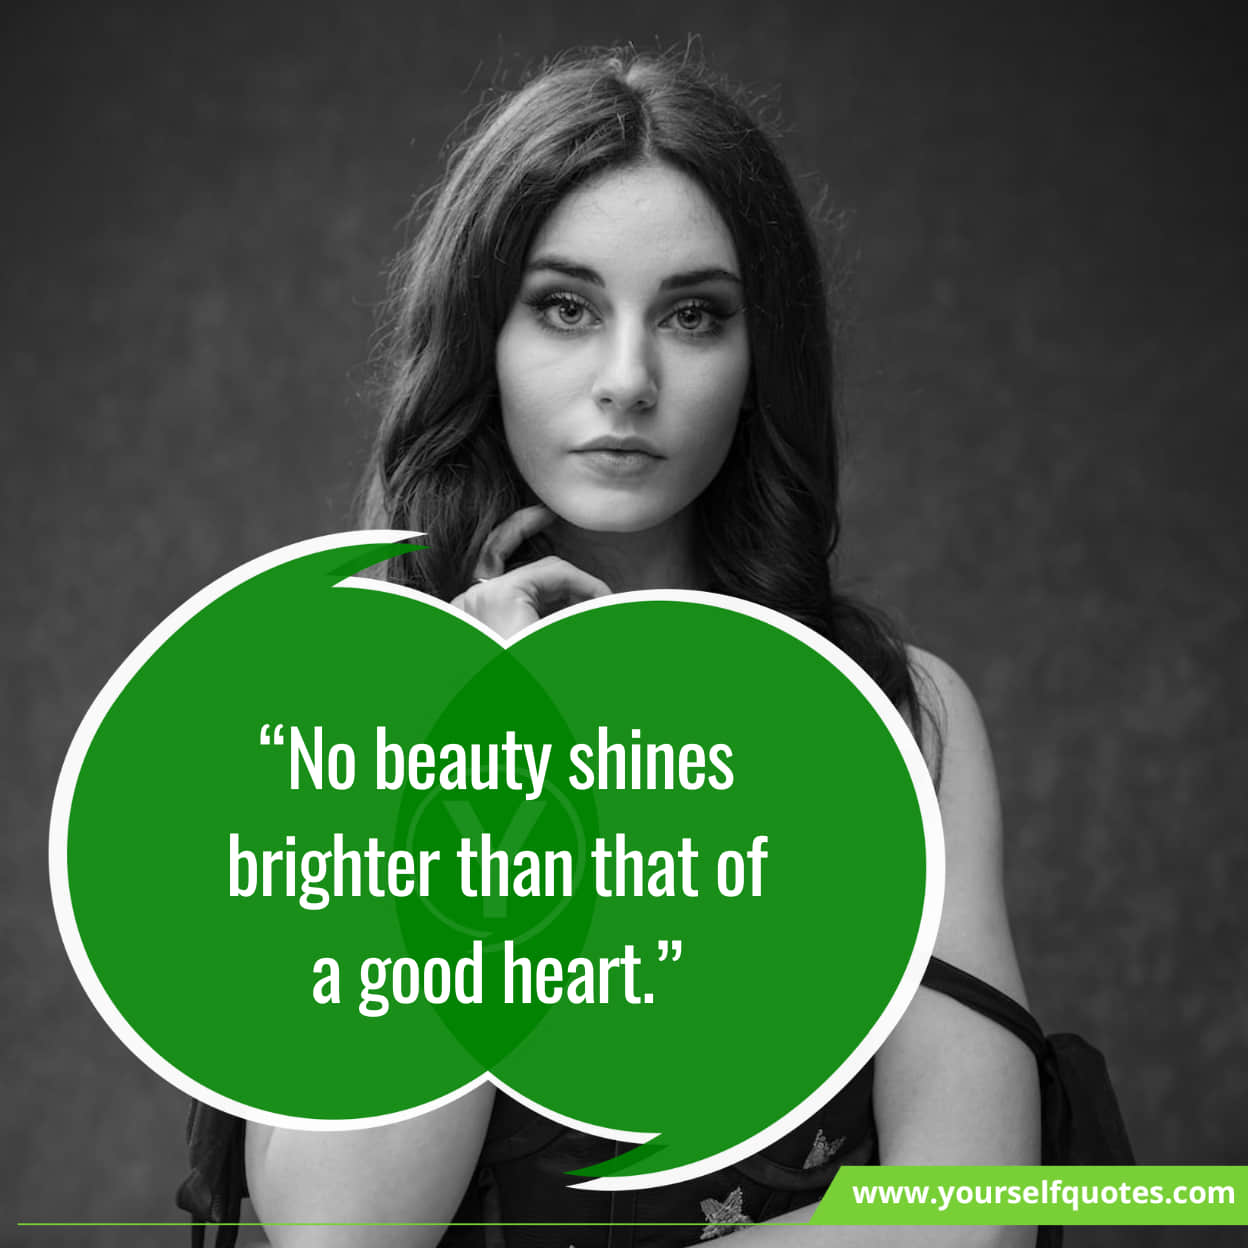 Inspiring Best Quotes On Beauty